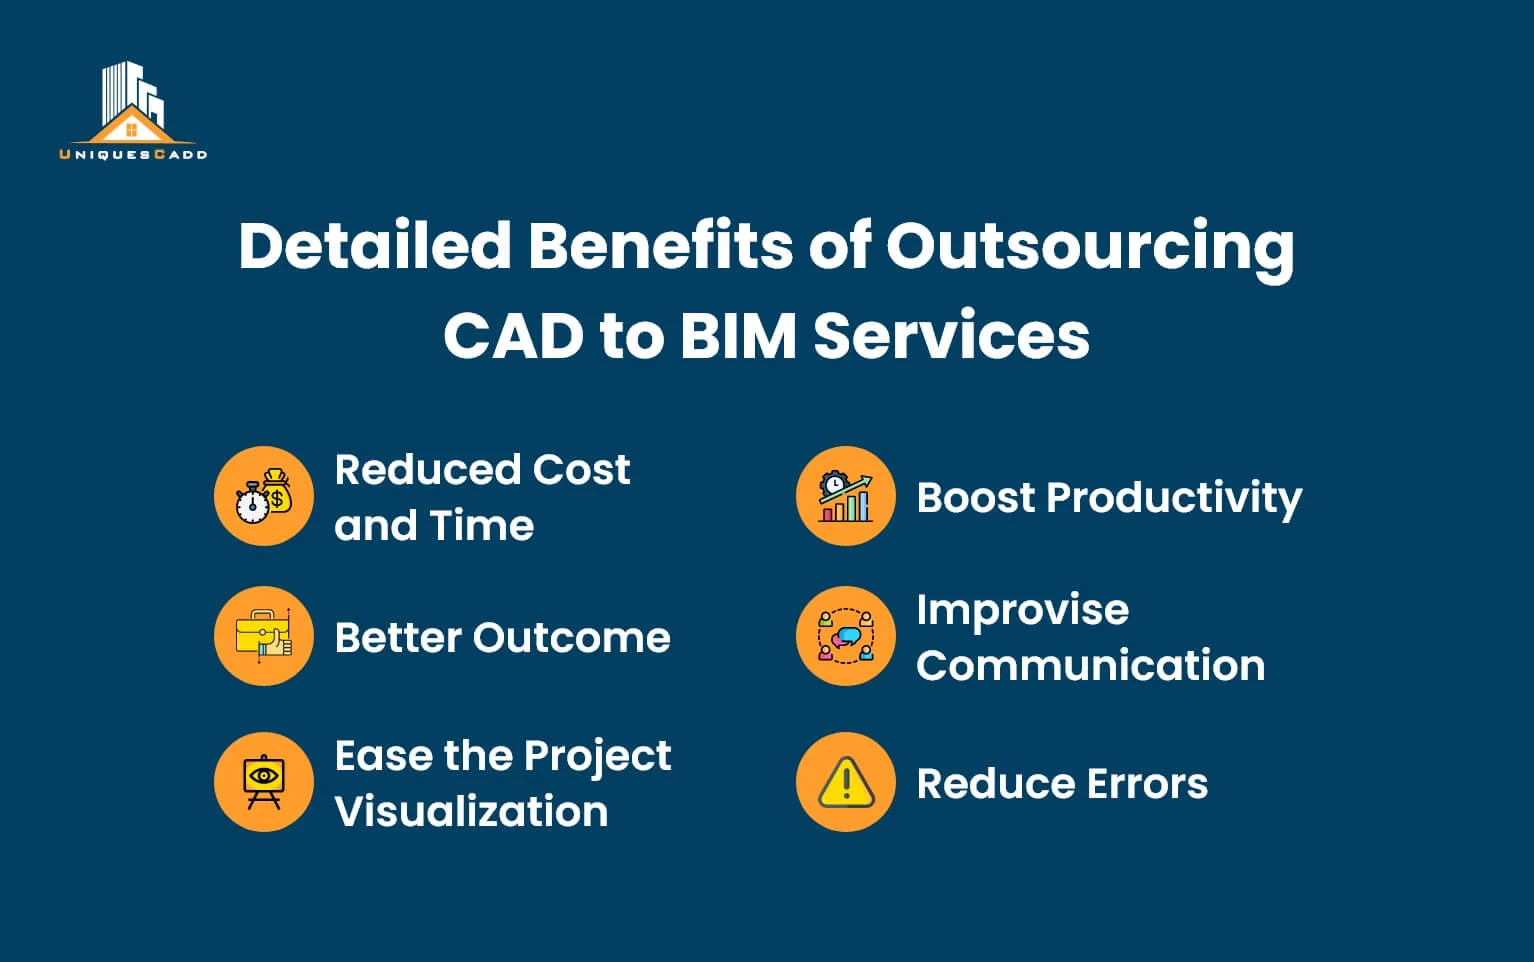 Details Benefits of Outsourcing CAD to BIM Services